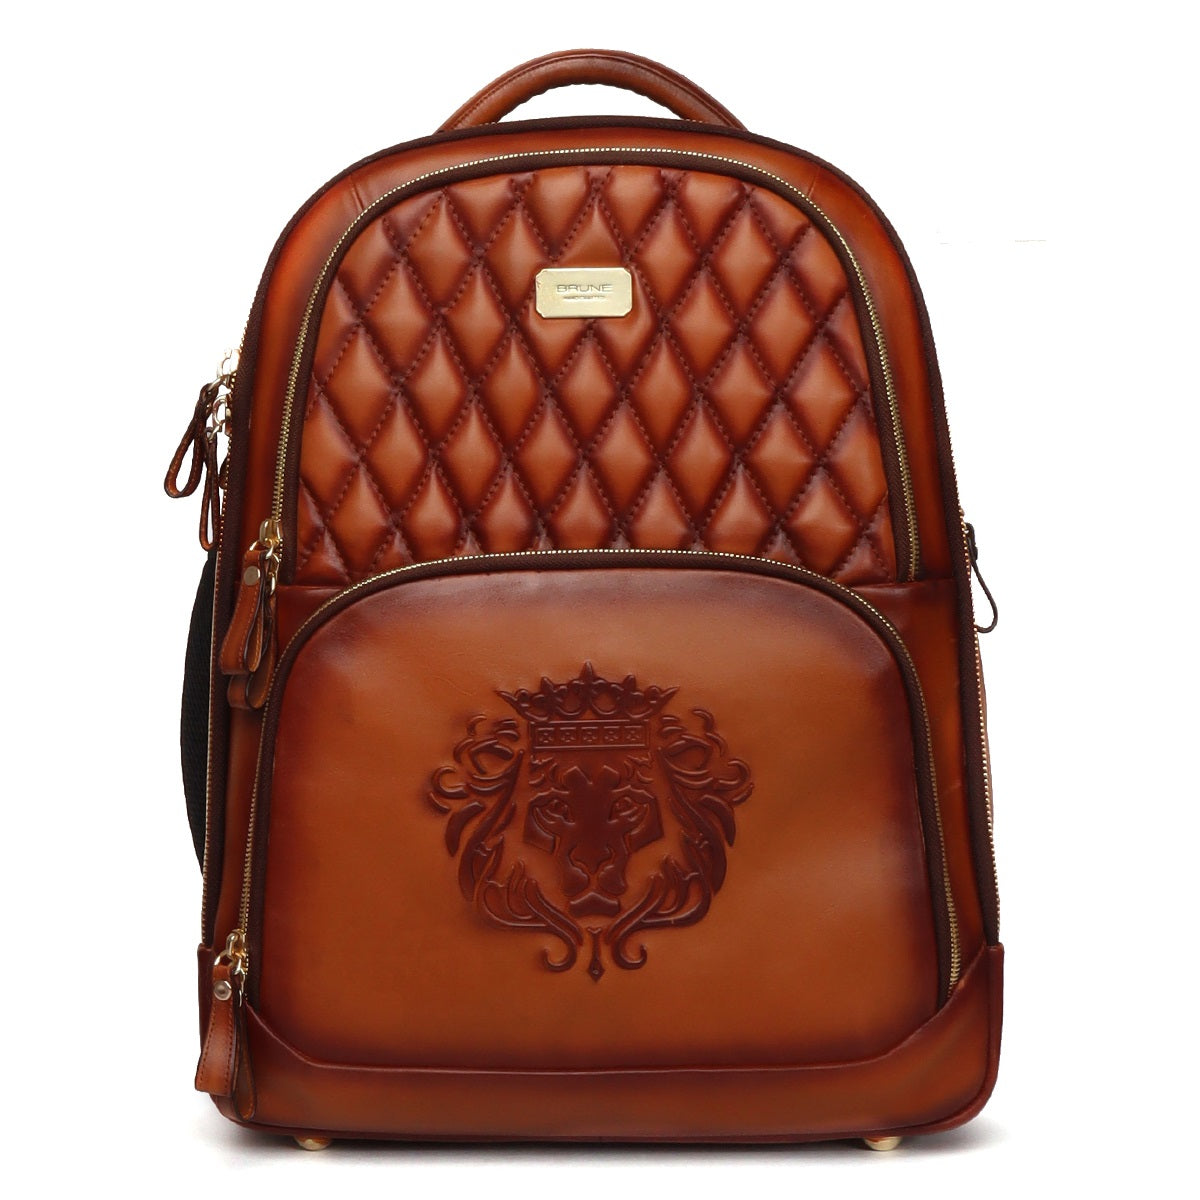 Diamond Stitched Backpack Tan Leather with Embossed Lion Logo by Brune & Bareskin